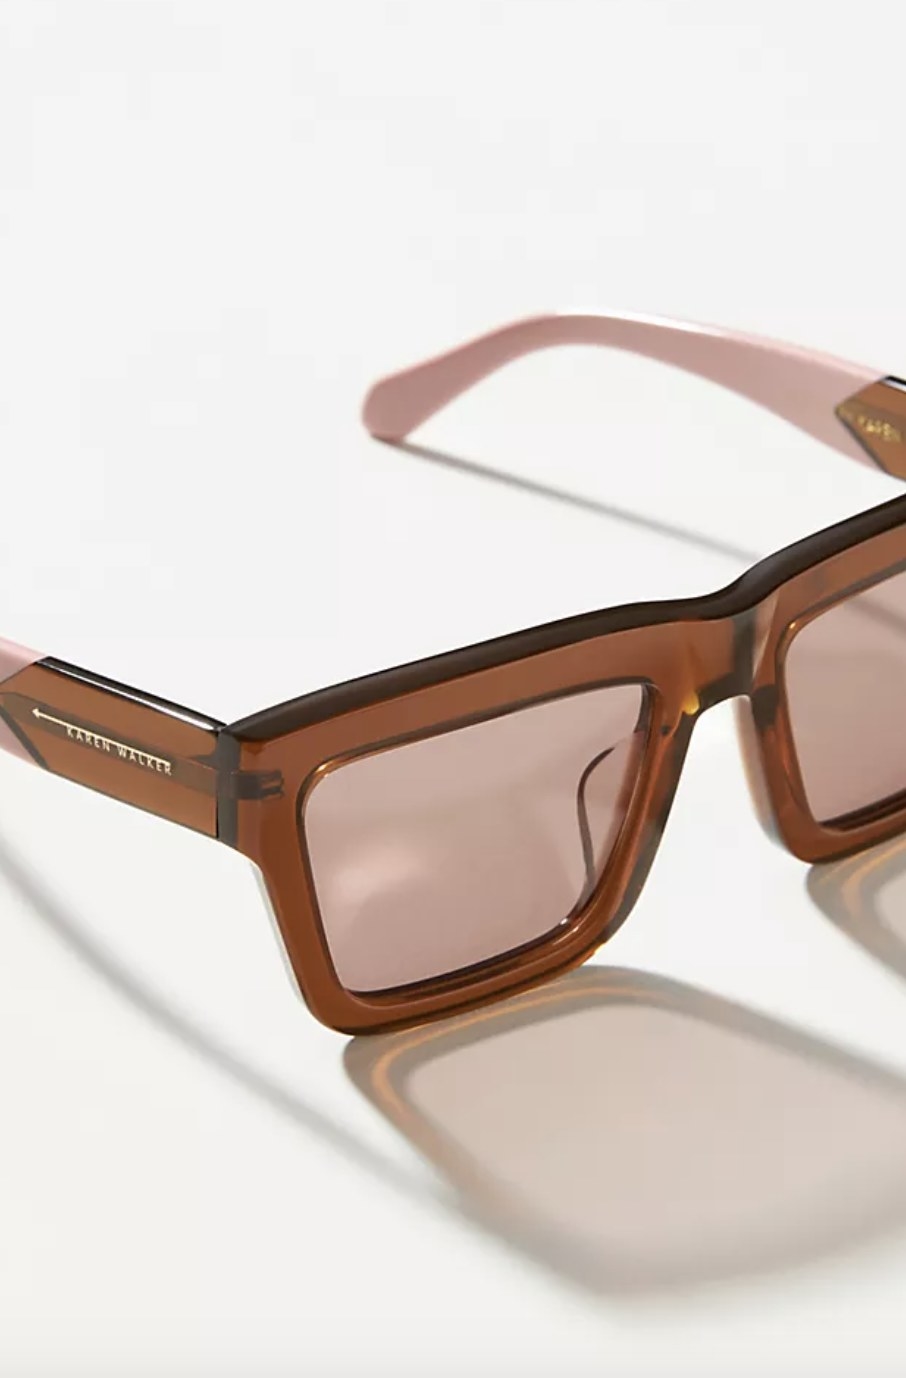 The sunglasses are a bronze color with light pink accents